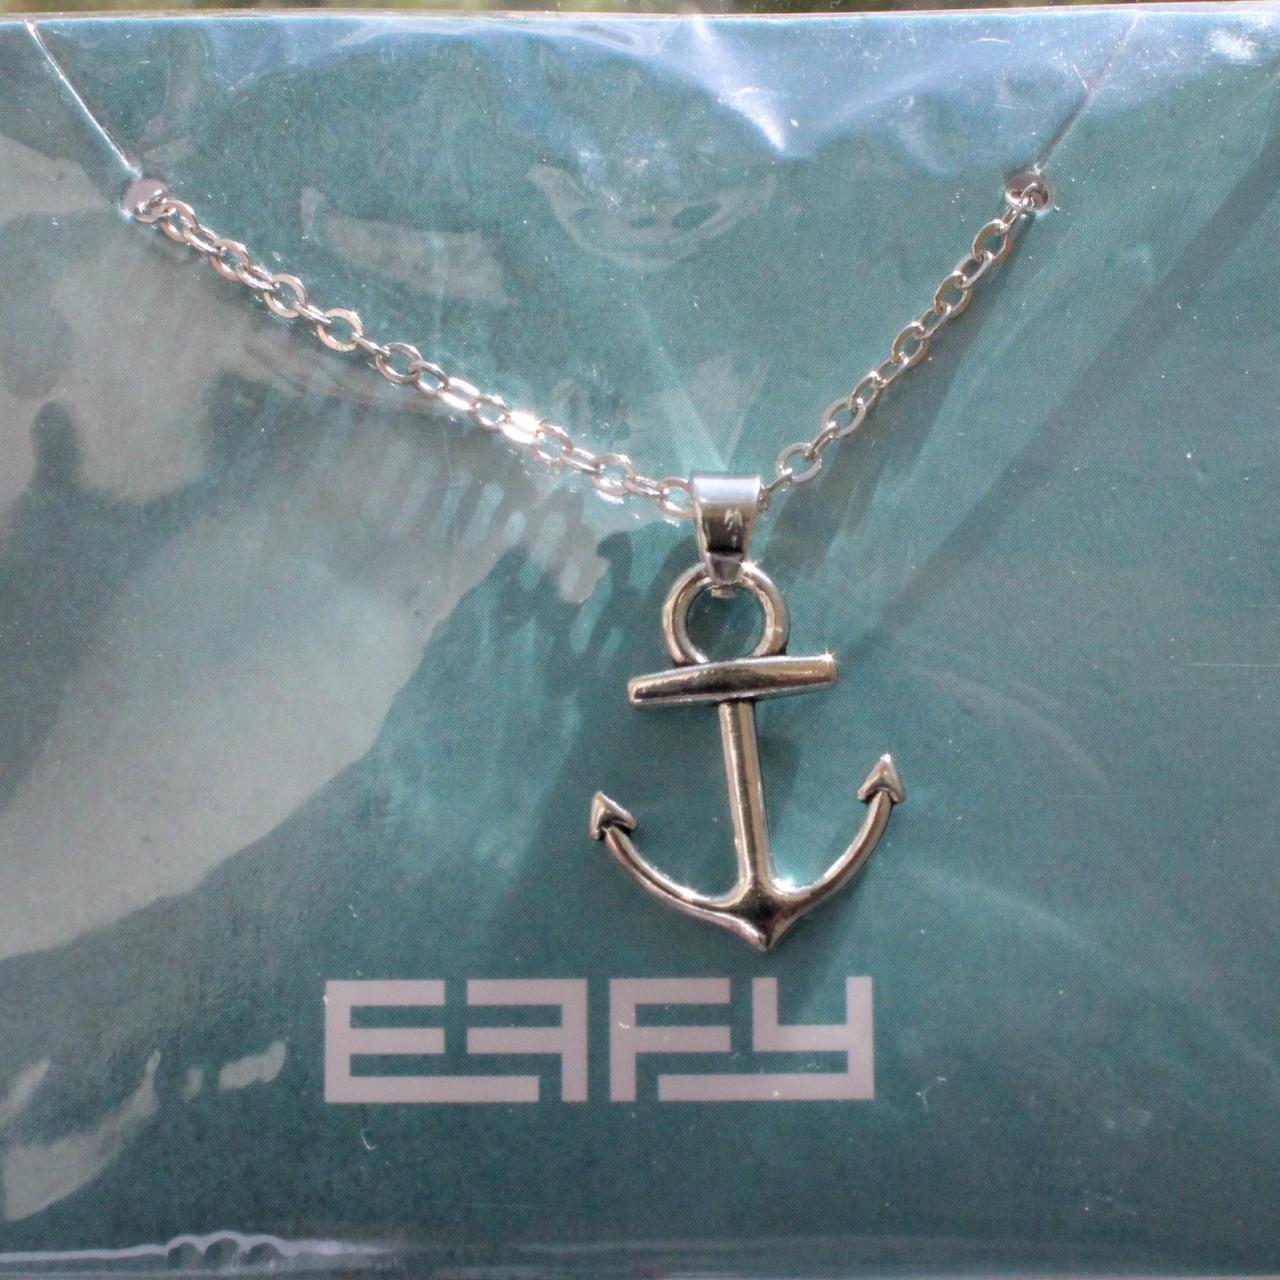 Product Image 2 - EFFY SILVER ANCHOR NECKLACE ⚓

★